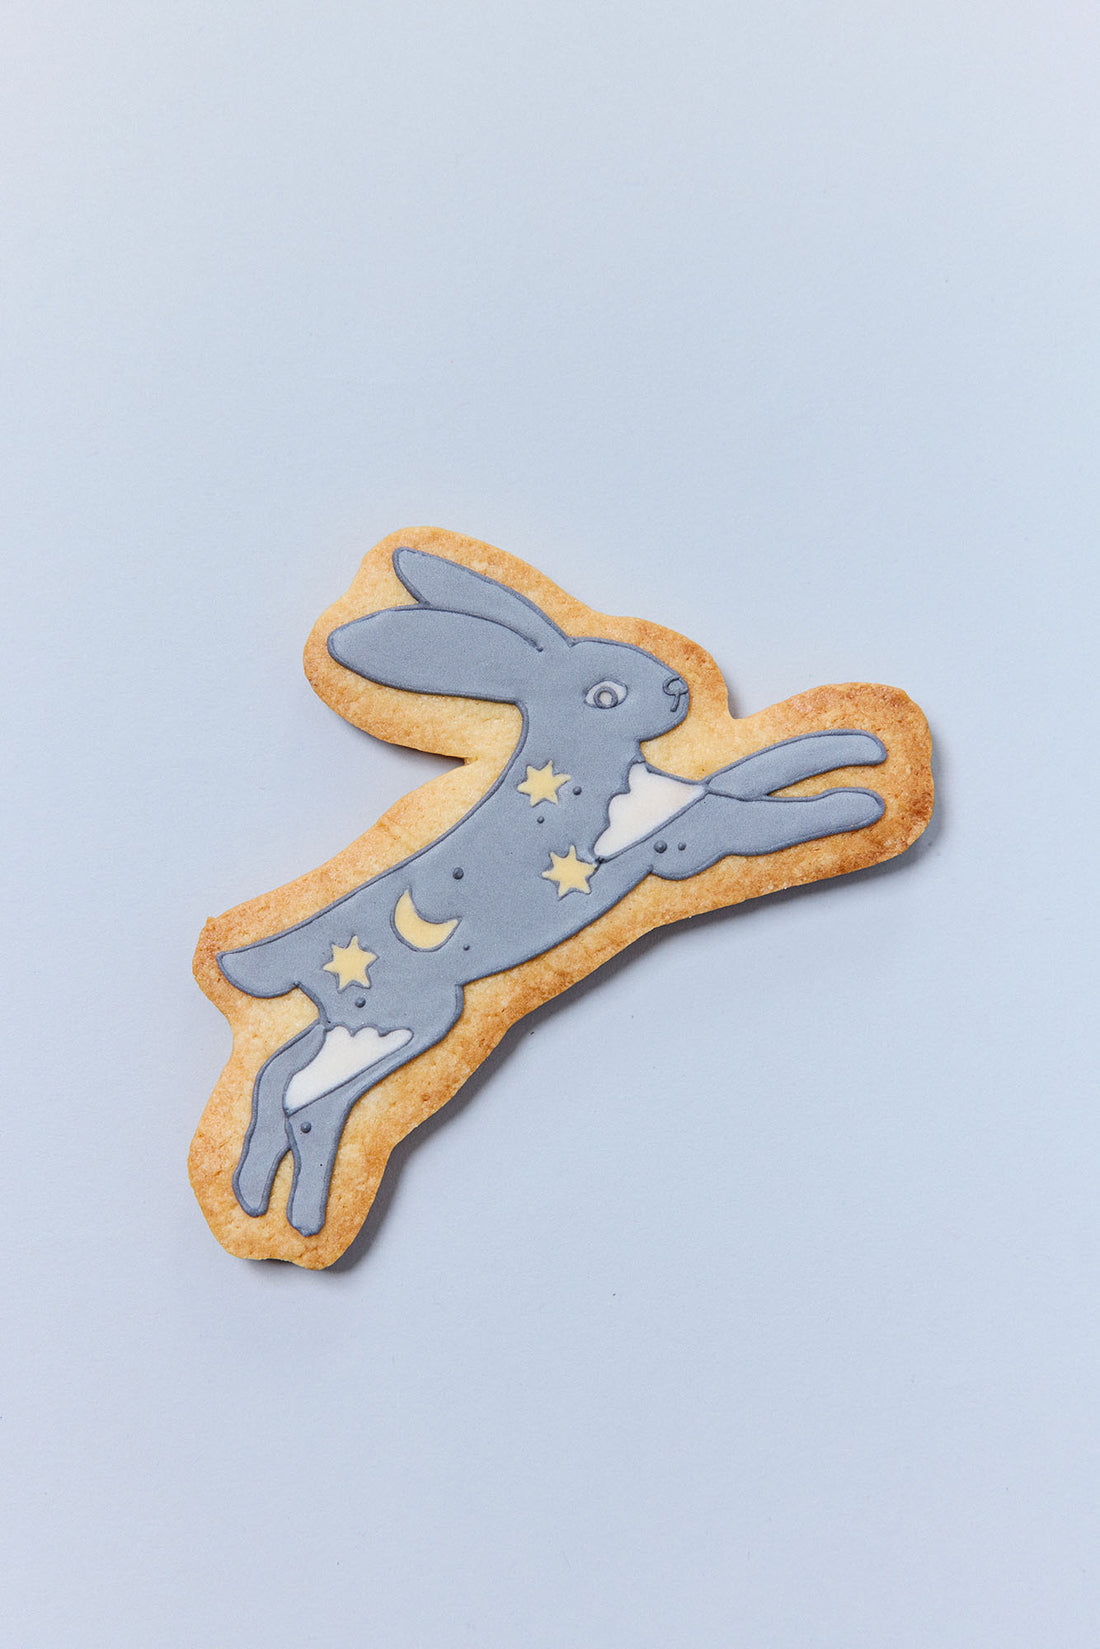 Eve Souvenir Cookie <br><br>(This item is currently being prepared for international shipping.  <br> Please wait a little longer.)